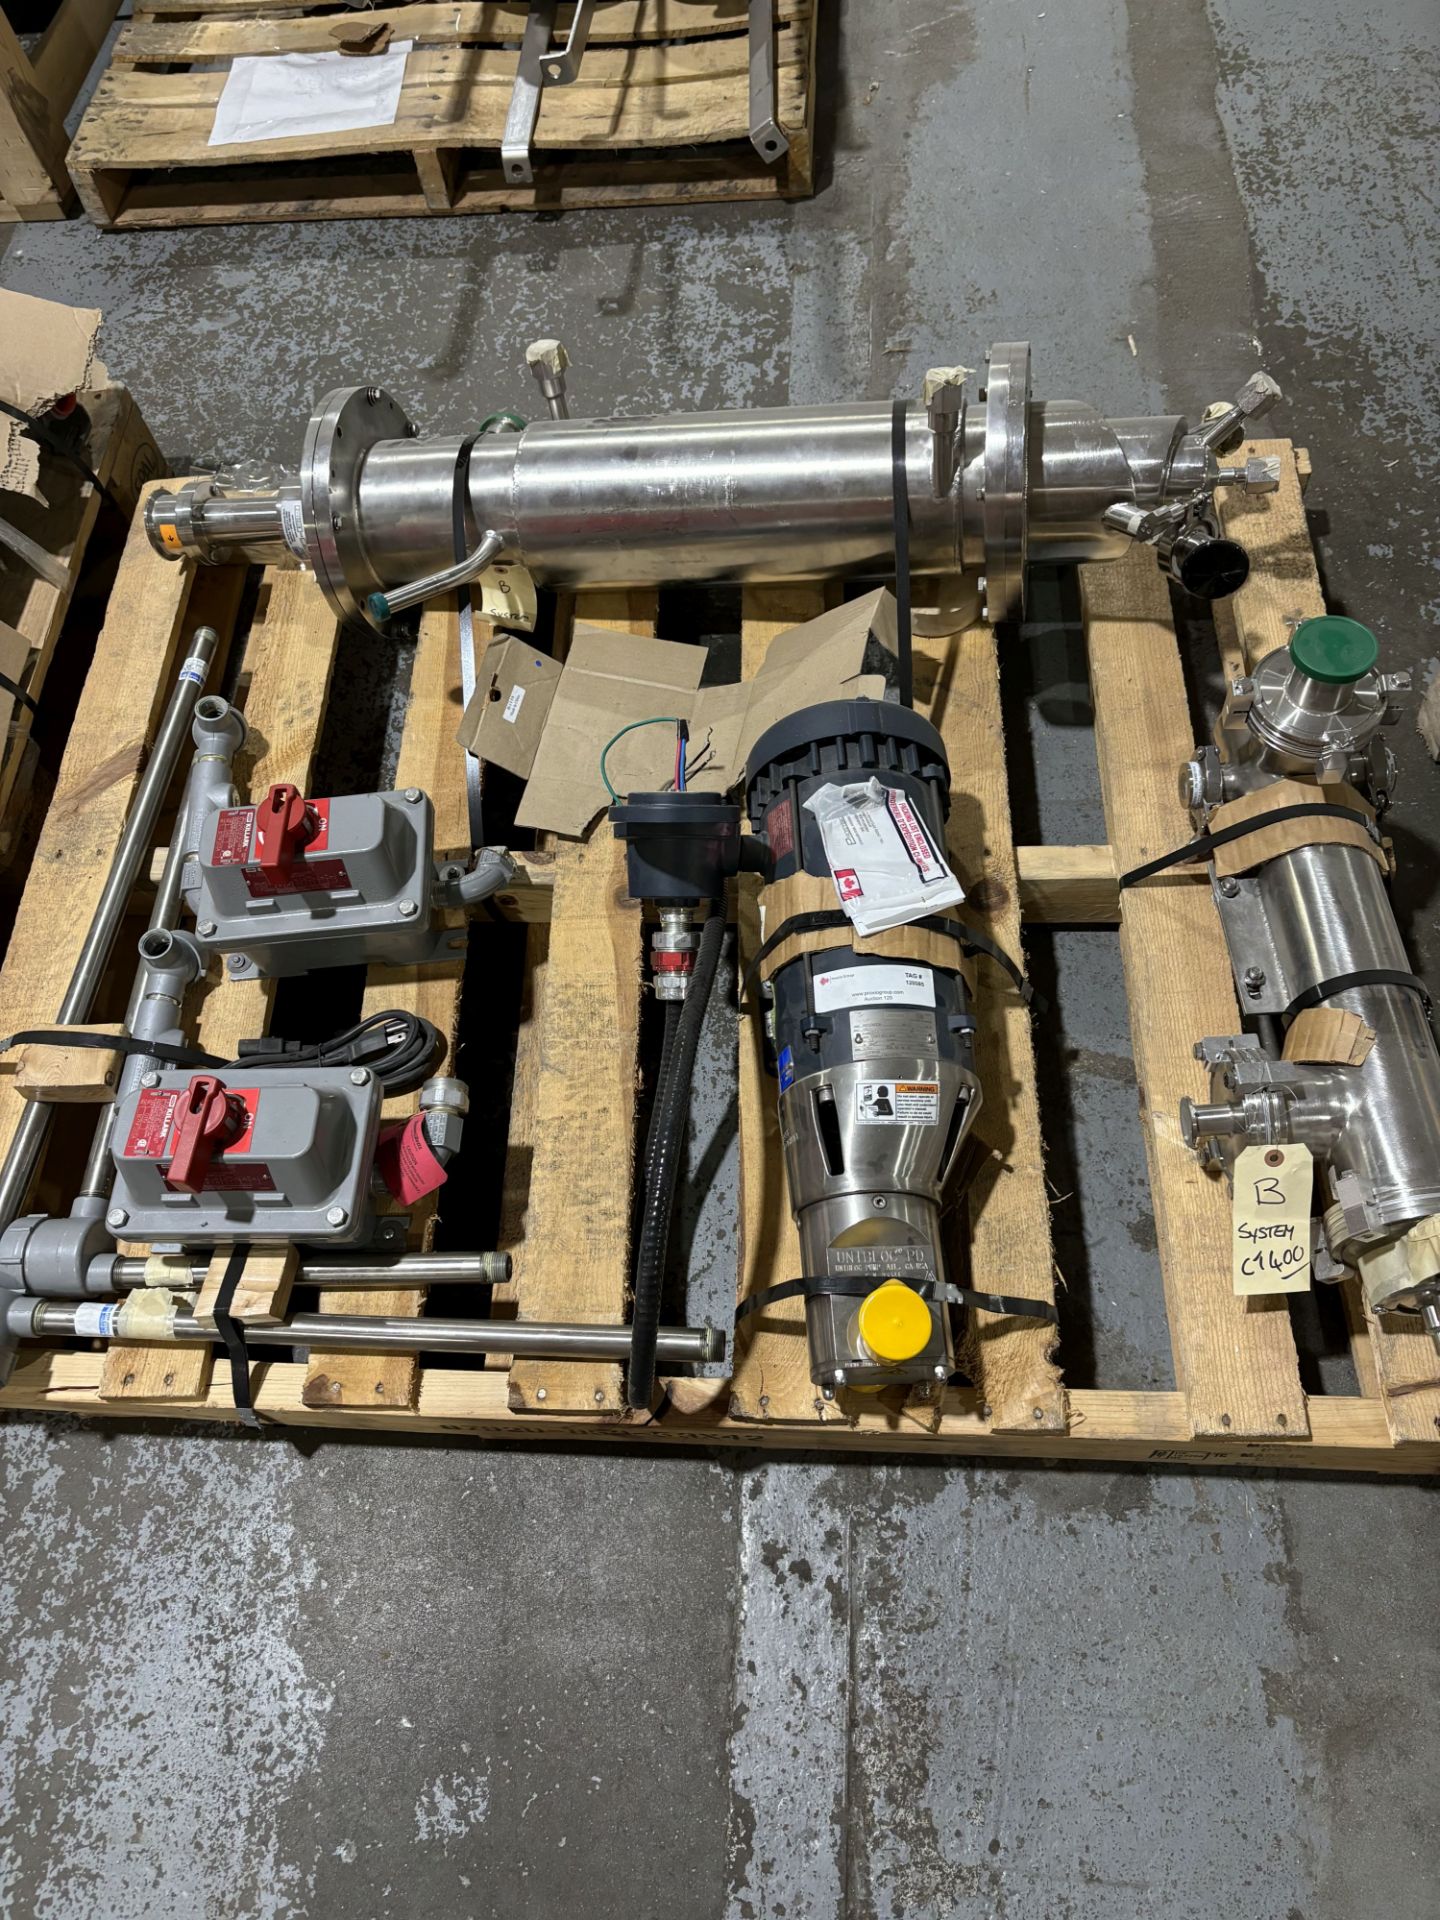 Pump/motor, switches, Vessel